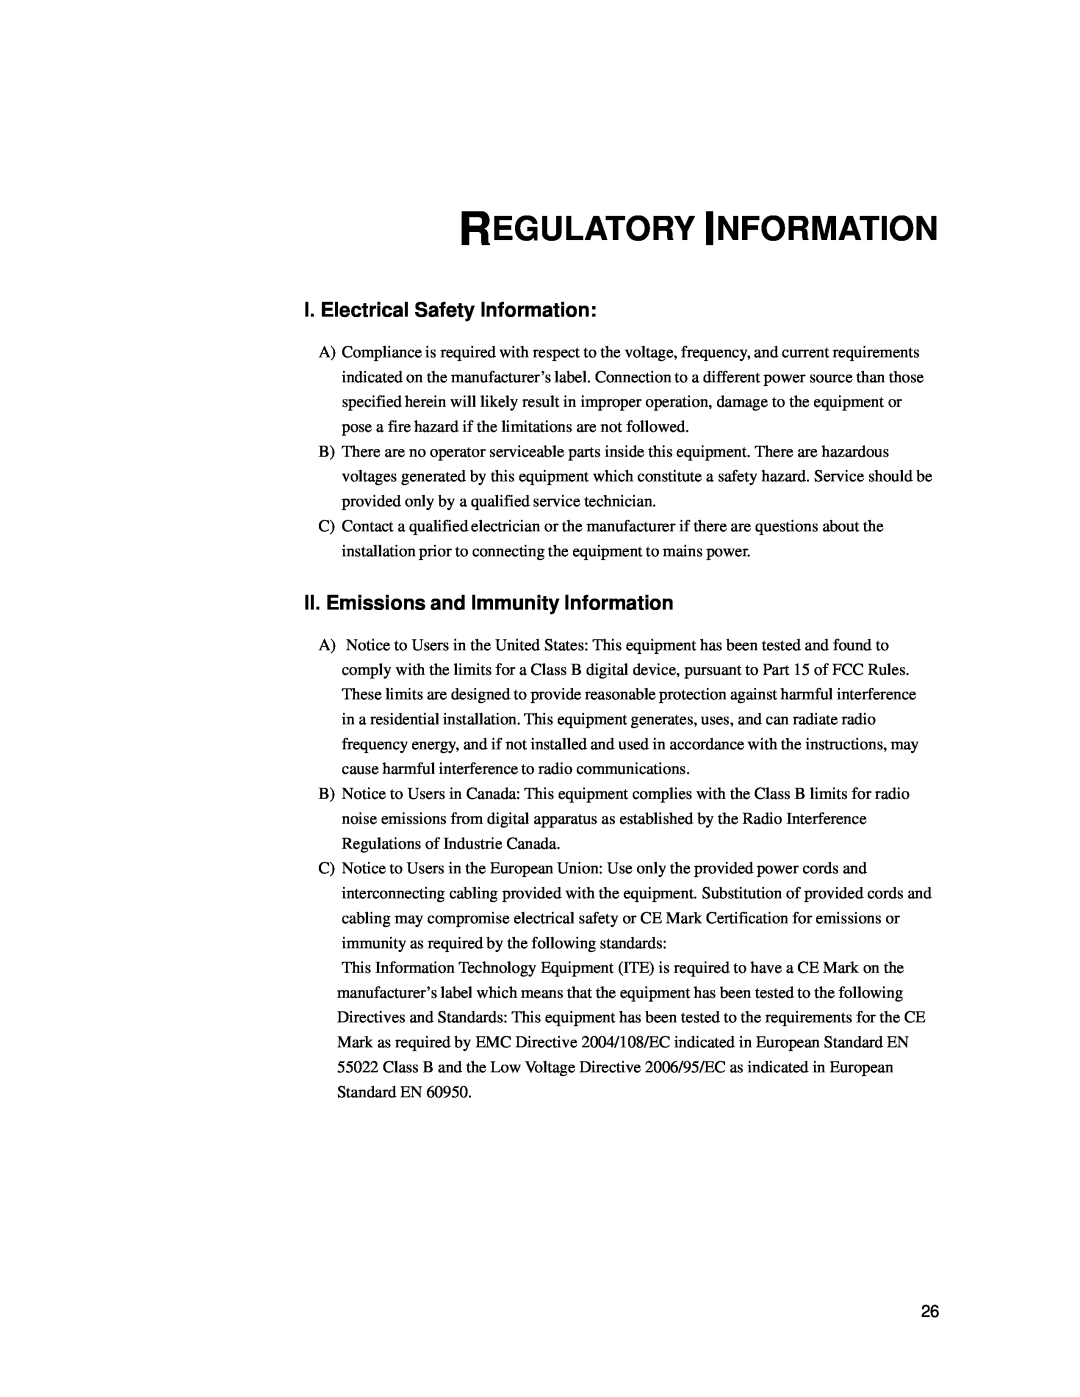 Elo TouchSystems 1939L Regulatory Information, I. Electrical Safety Information, II. Emissions and Immunity Information 